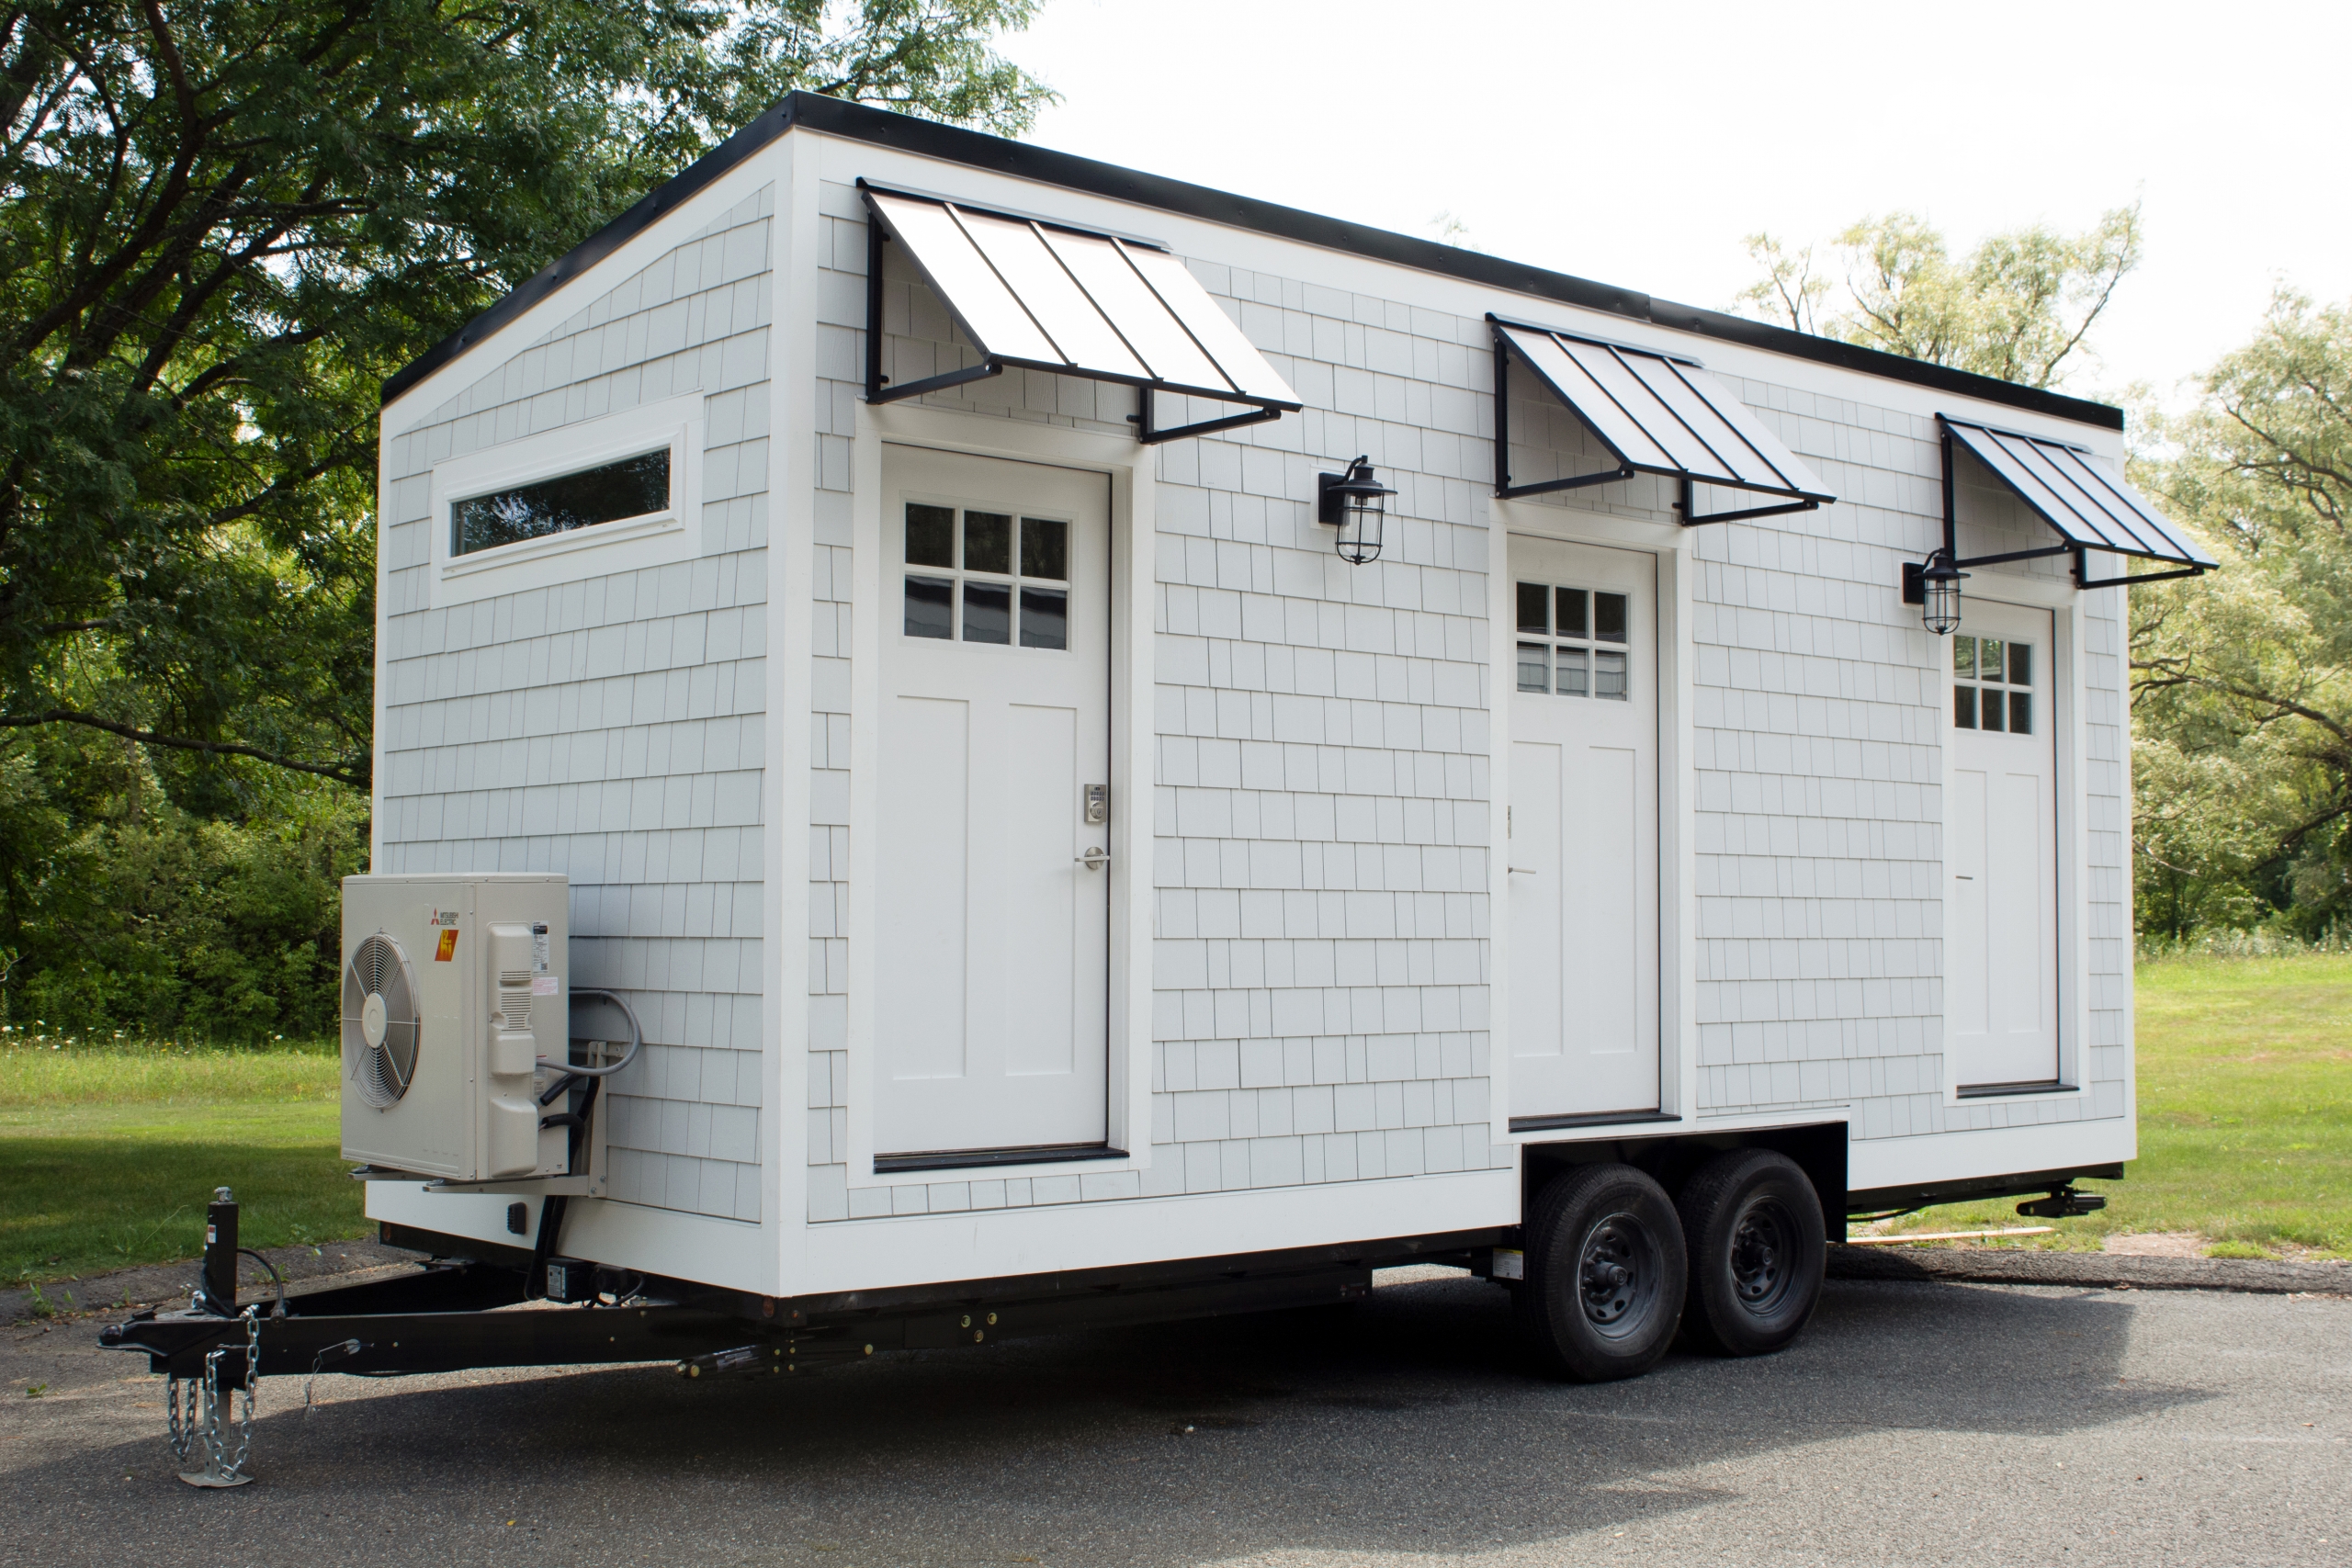 Tiny House on Wheels Concept for Mobile Retail Store!